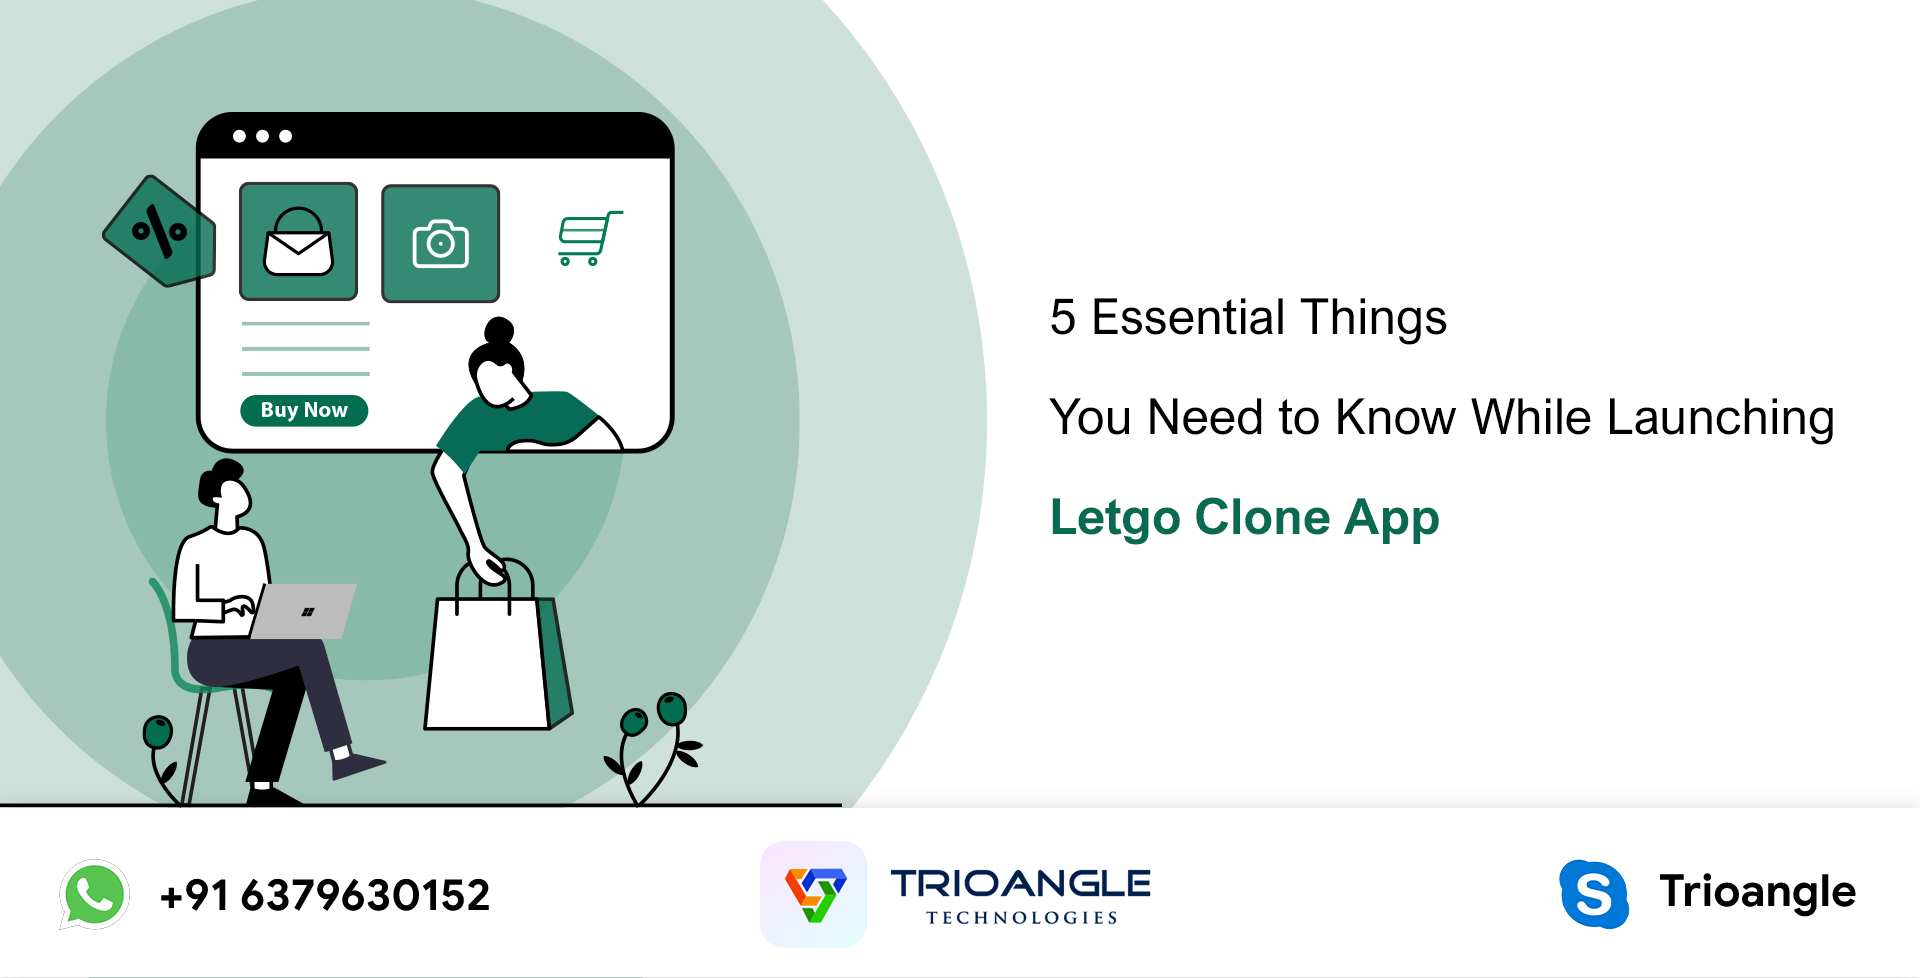 5 Essential Things You Need to Know While Launching Letgo Clone App